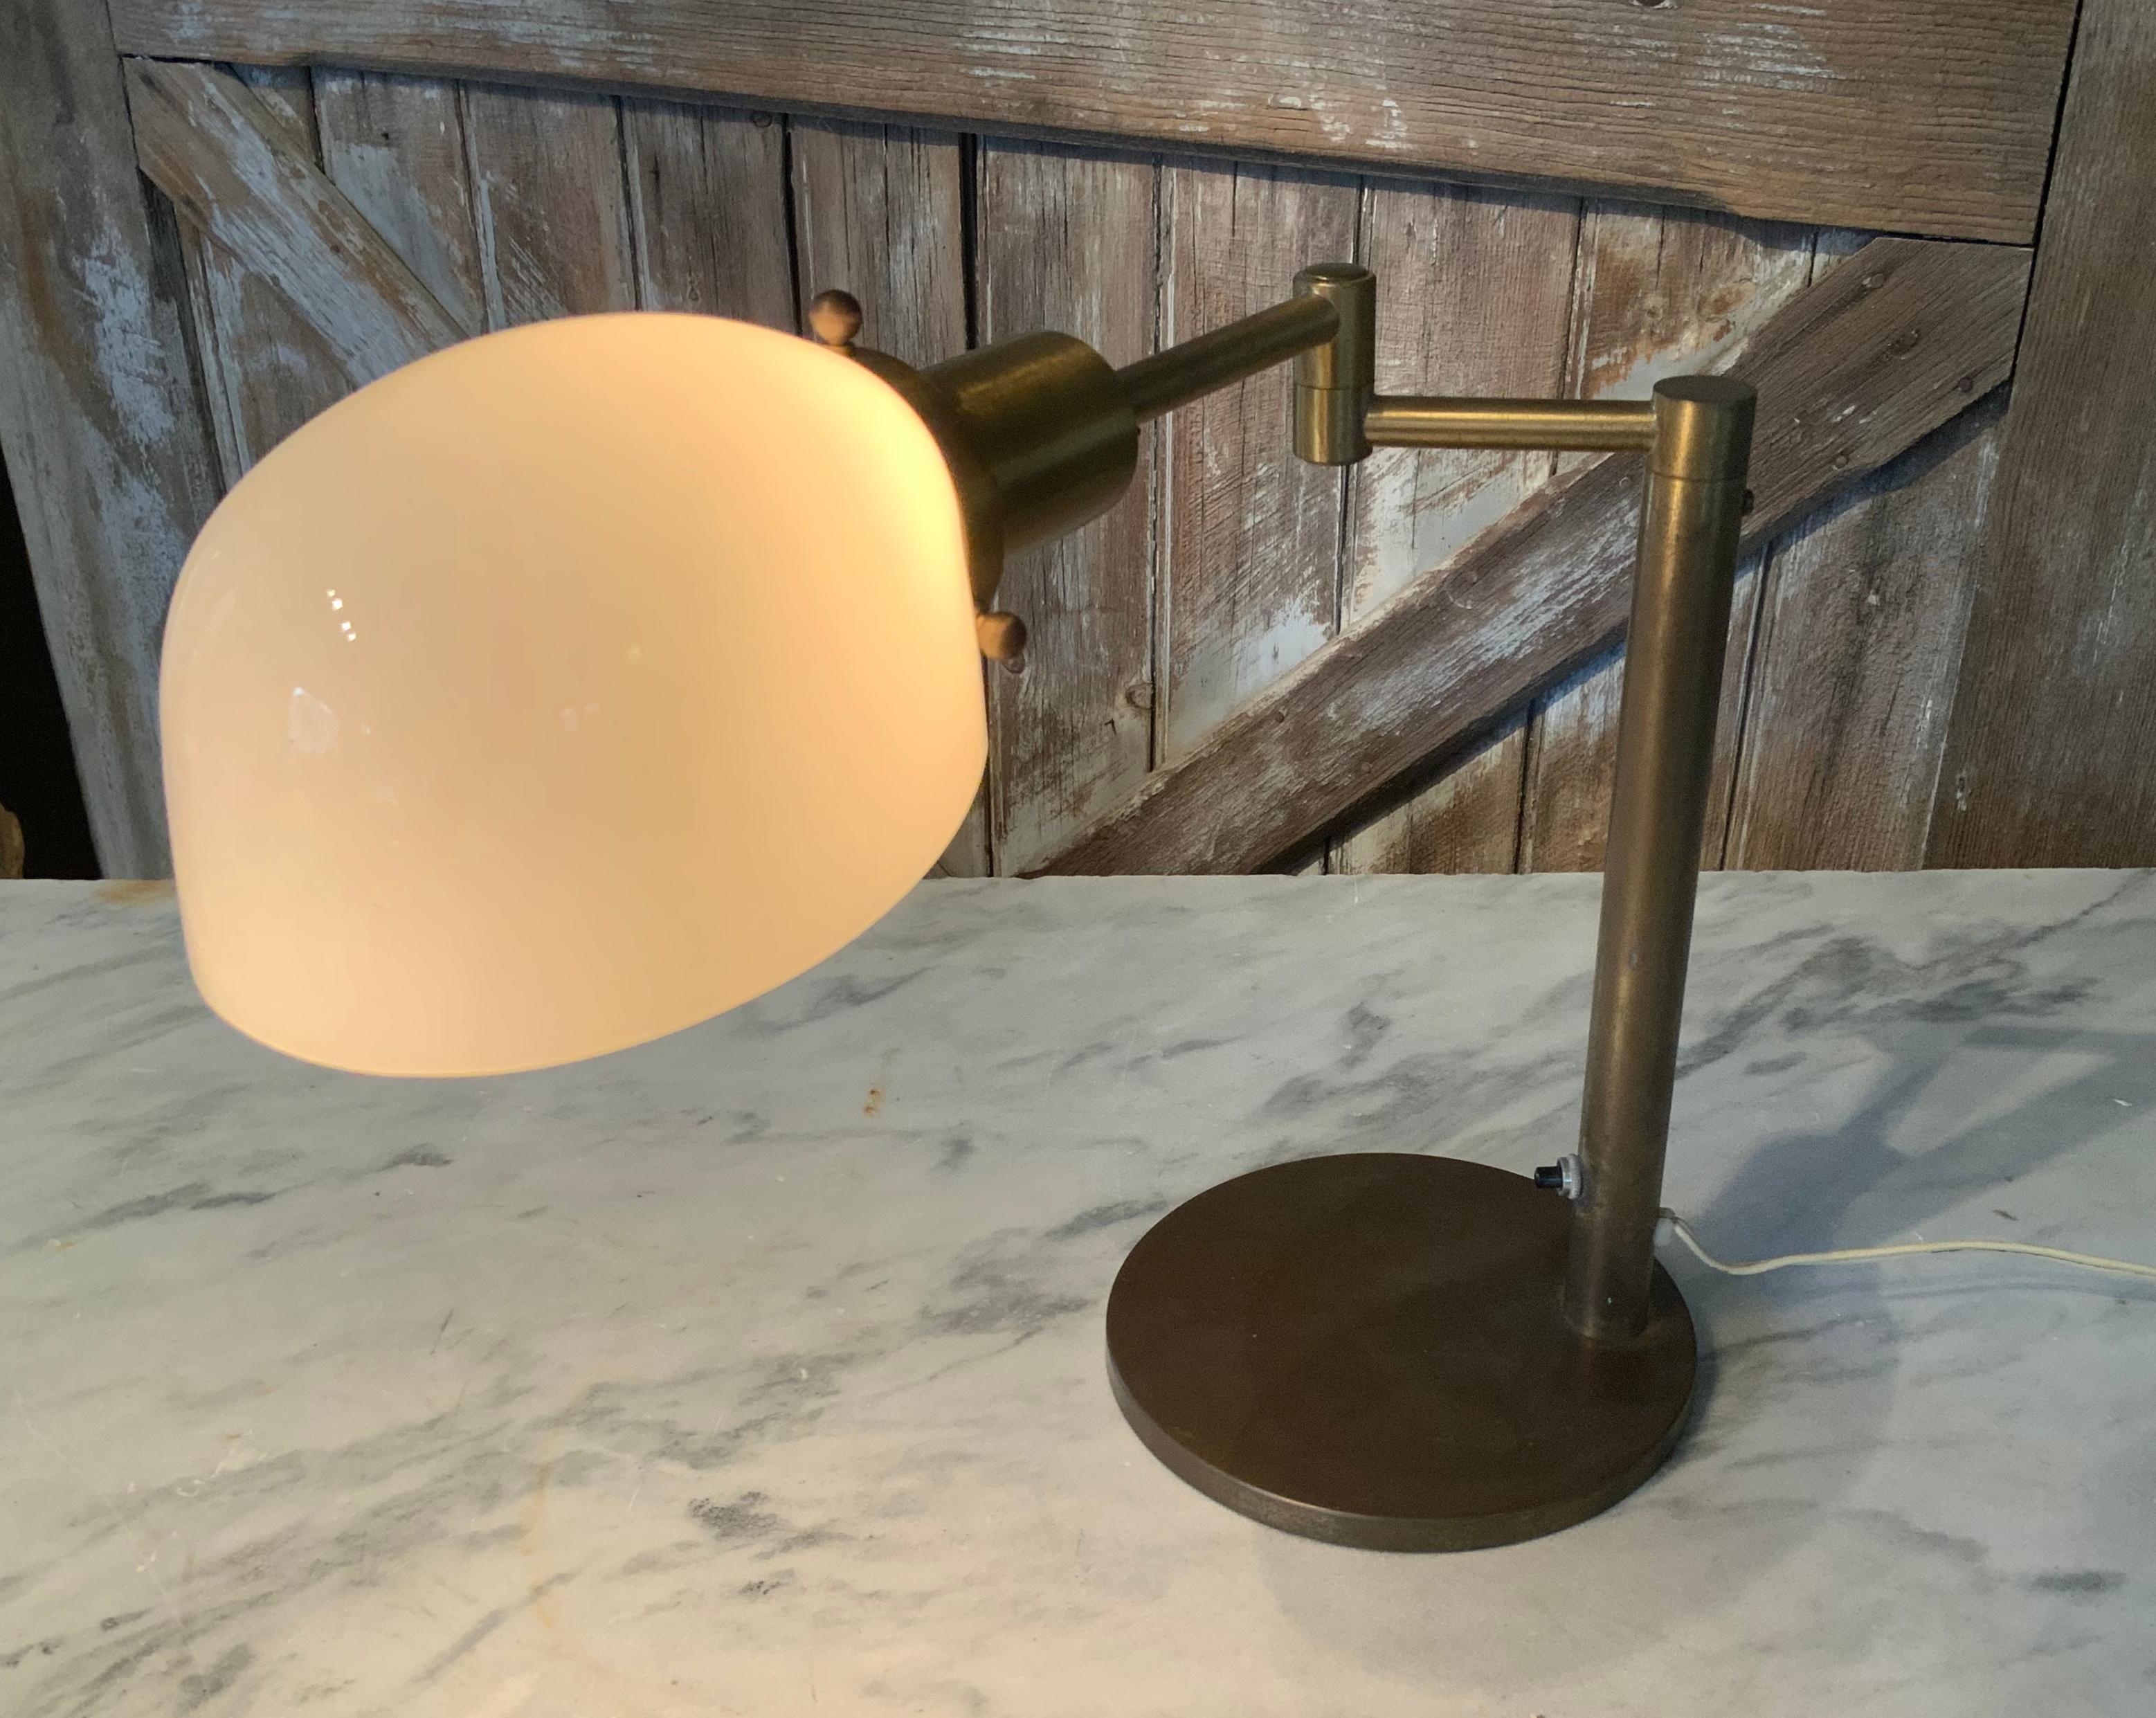 A beautiful and classic modern brass swing arm desk lamp by Walter Nessen. very handsome design and with the original opaline glass shade. Stamped Nessen Lighting NYC.